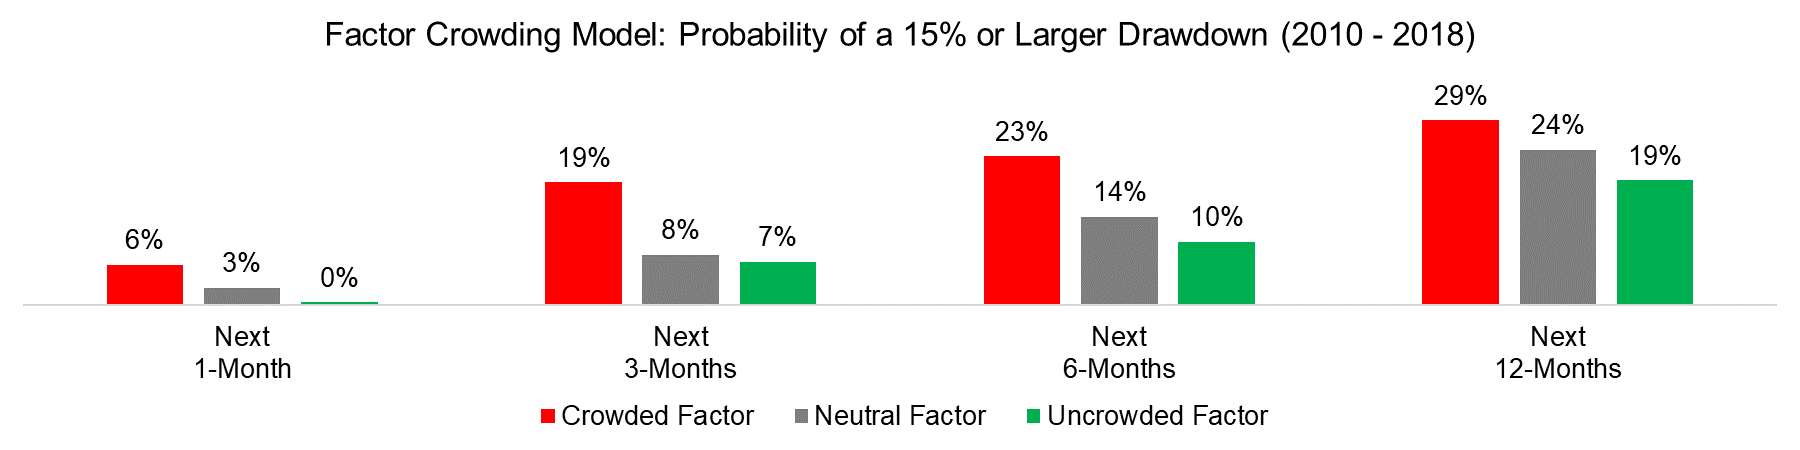 Factor Crowding Model Probability of a 15% or Larger Drawdown (2010 - 2018)